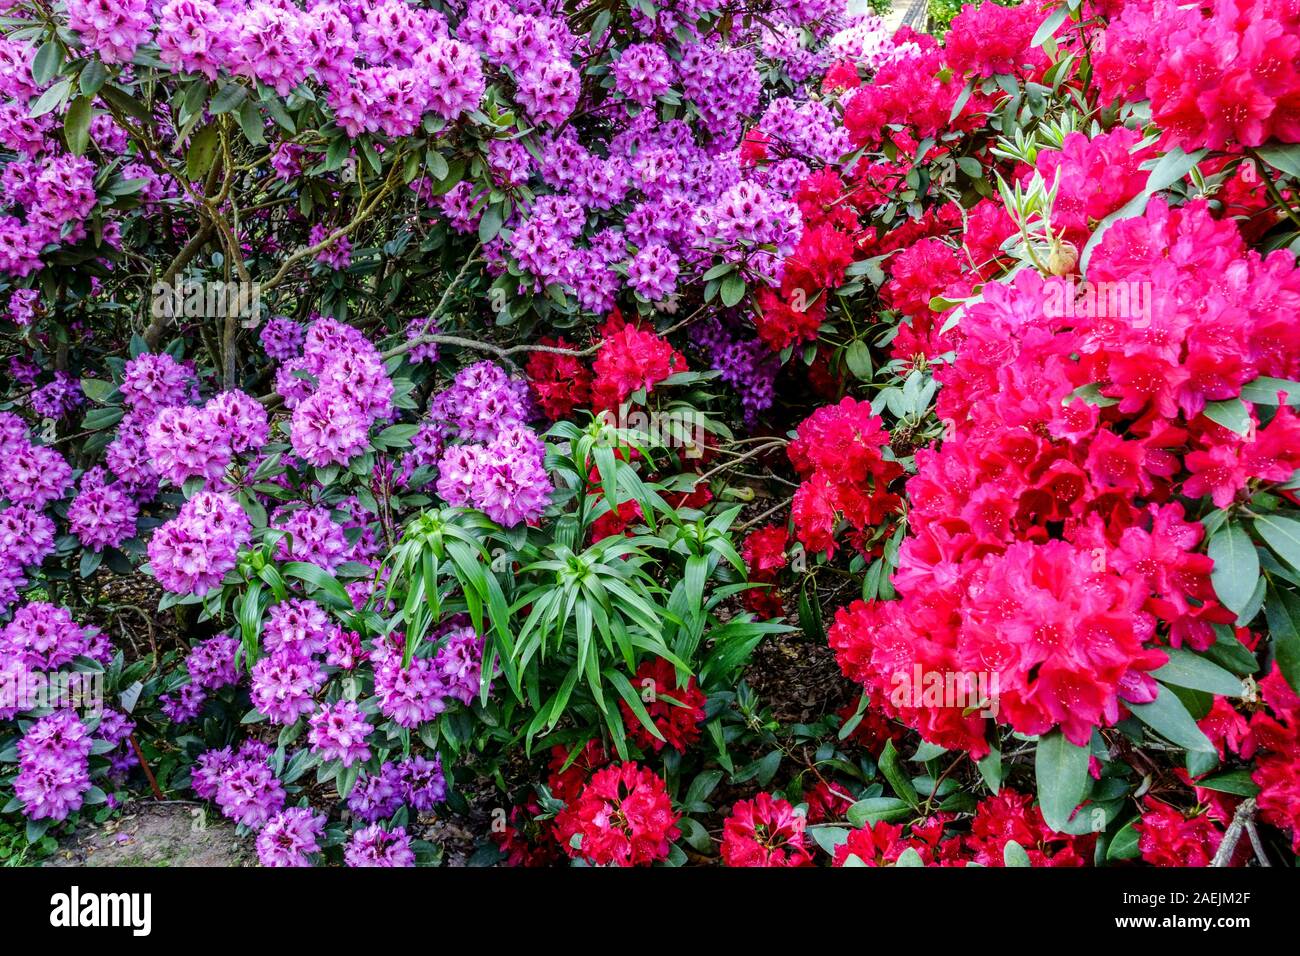 Purple Red Rhododendrons flowering shrubs Stock Photo